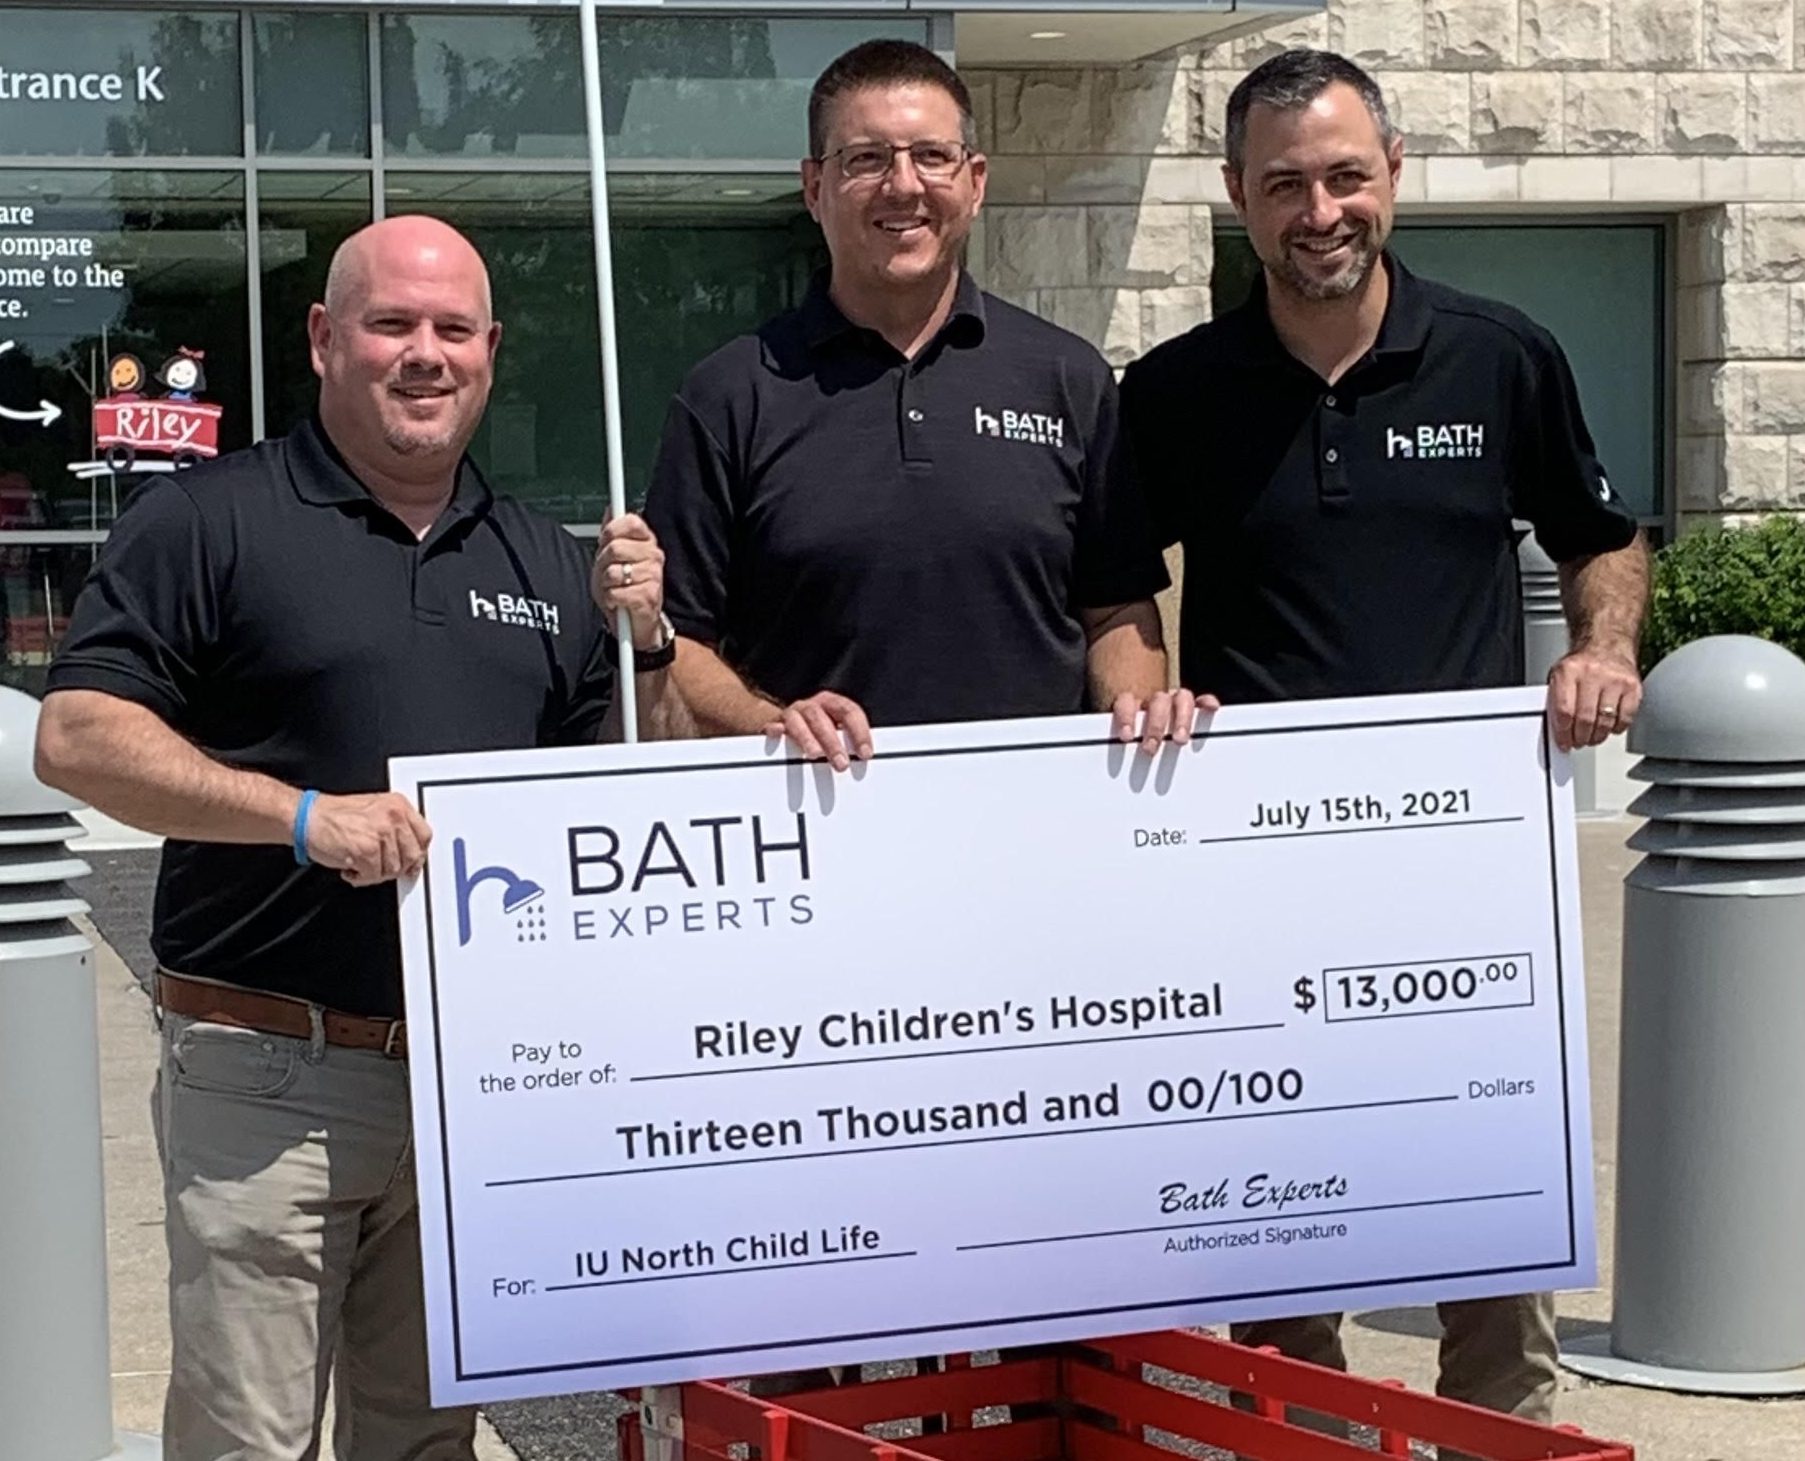 Bath Experts Introduces Tub/Shower Renovations In Indianapolis In As Little As One Day